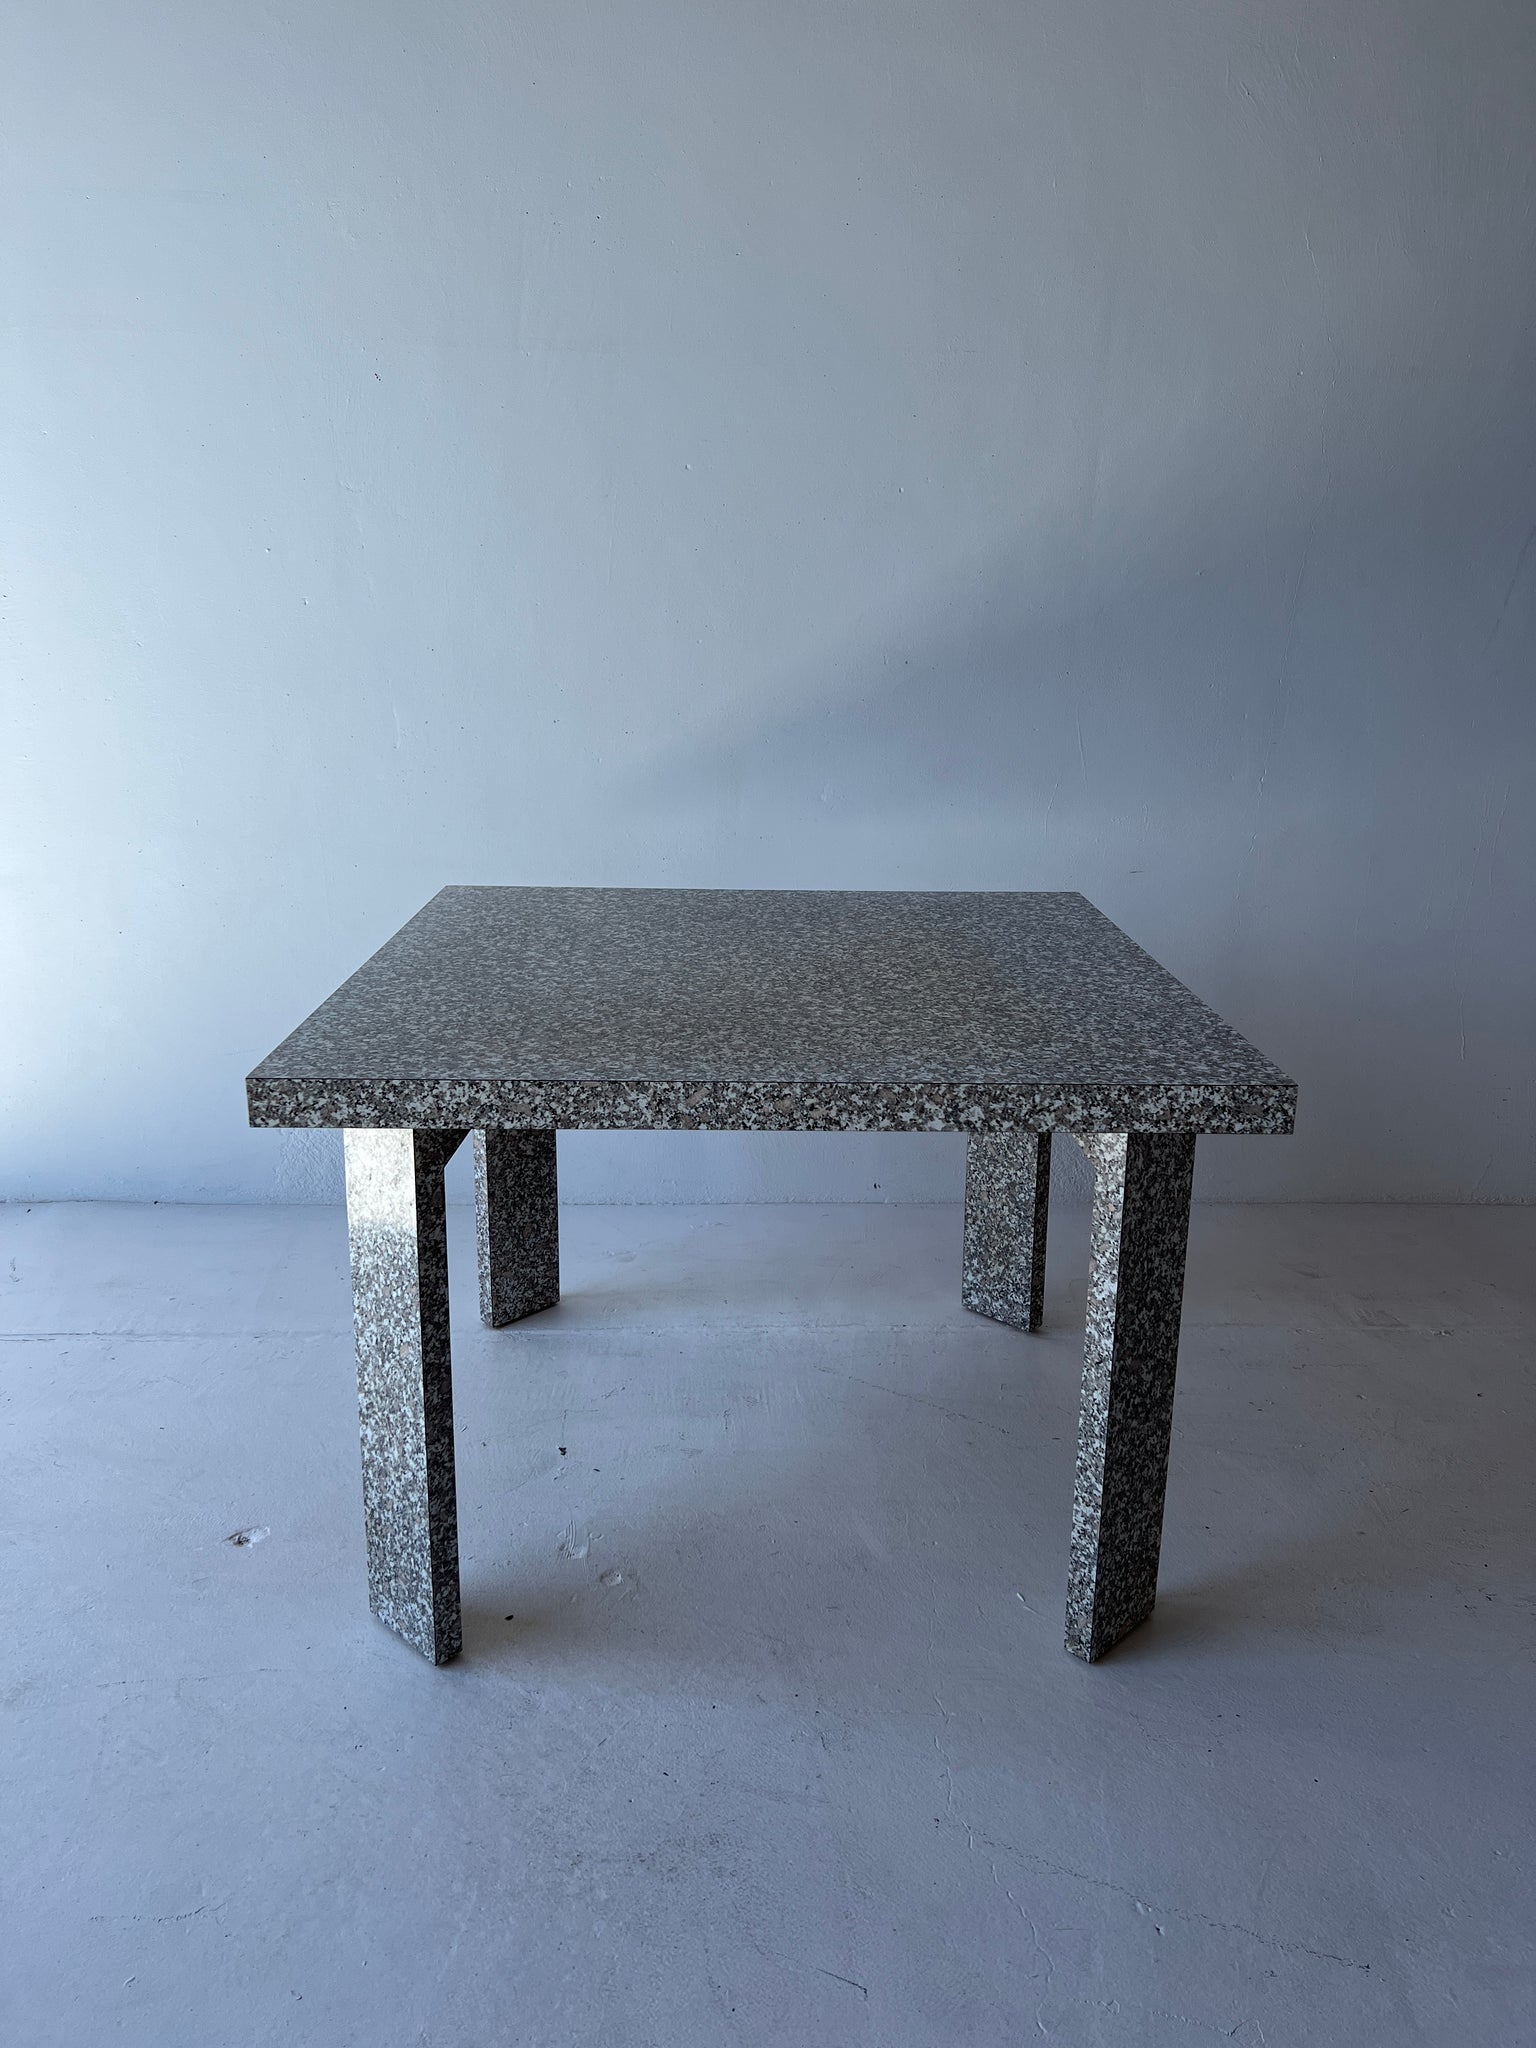 Grey Speckled Laminate Dining Table